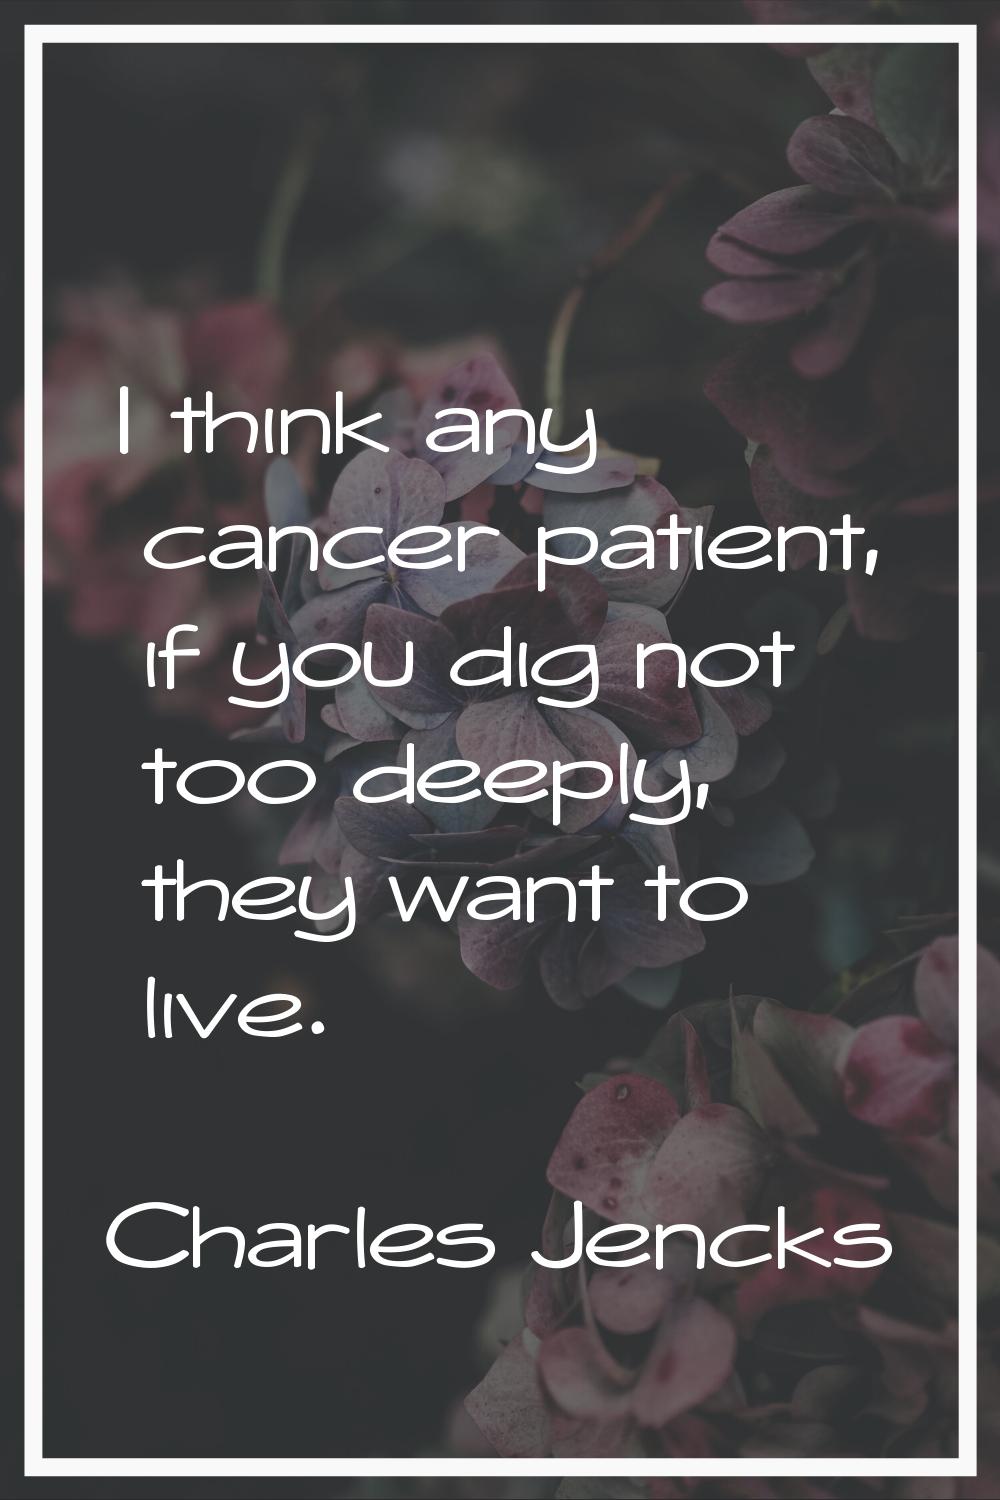 I think any cancer patient, if you dig not too deeply, they want to live.